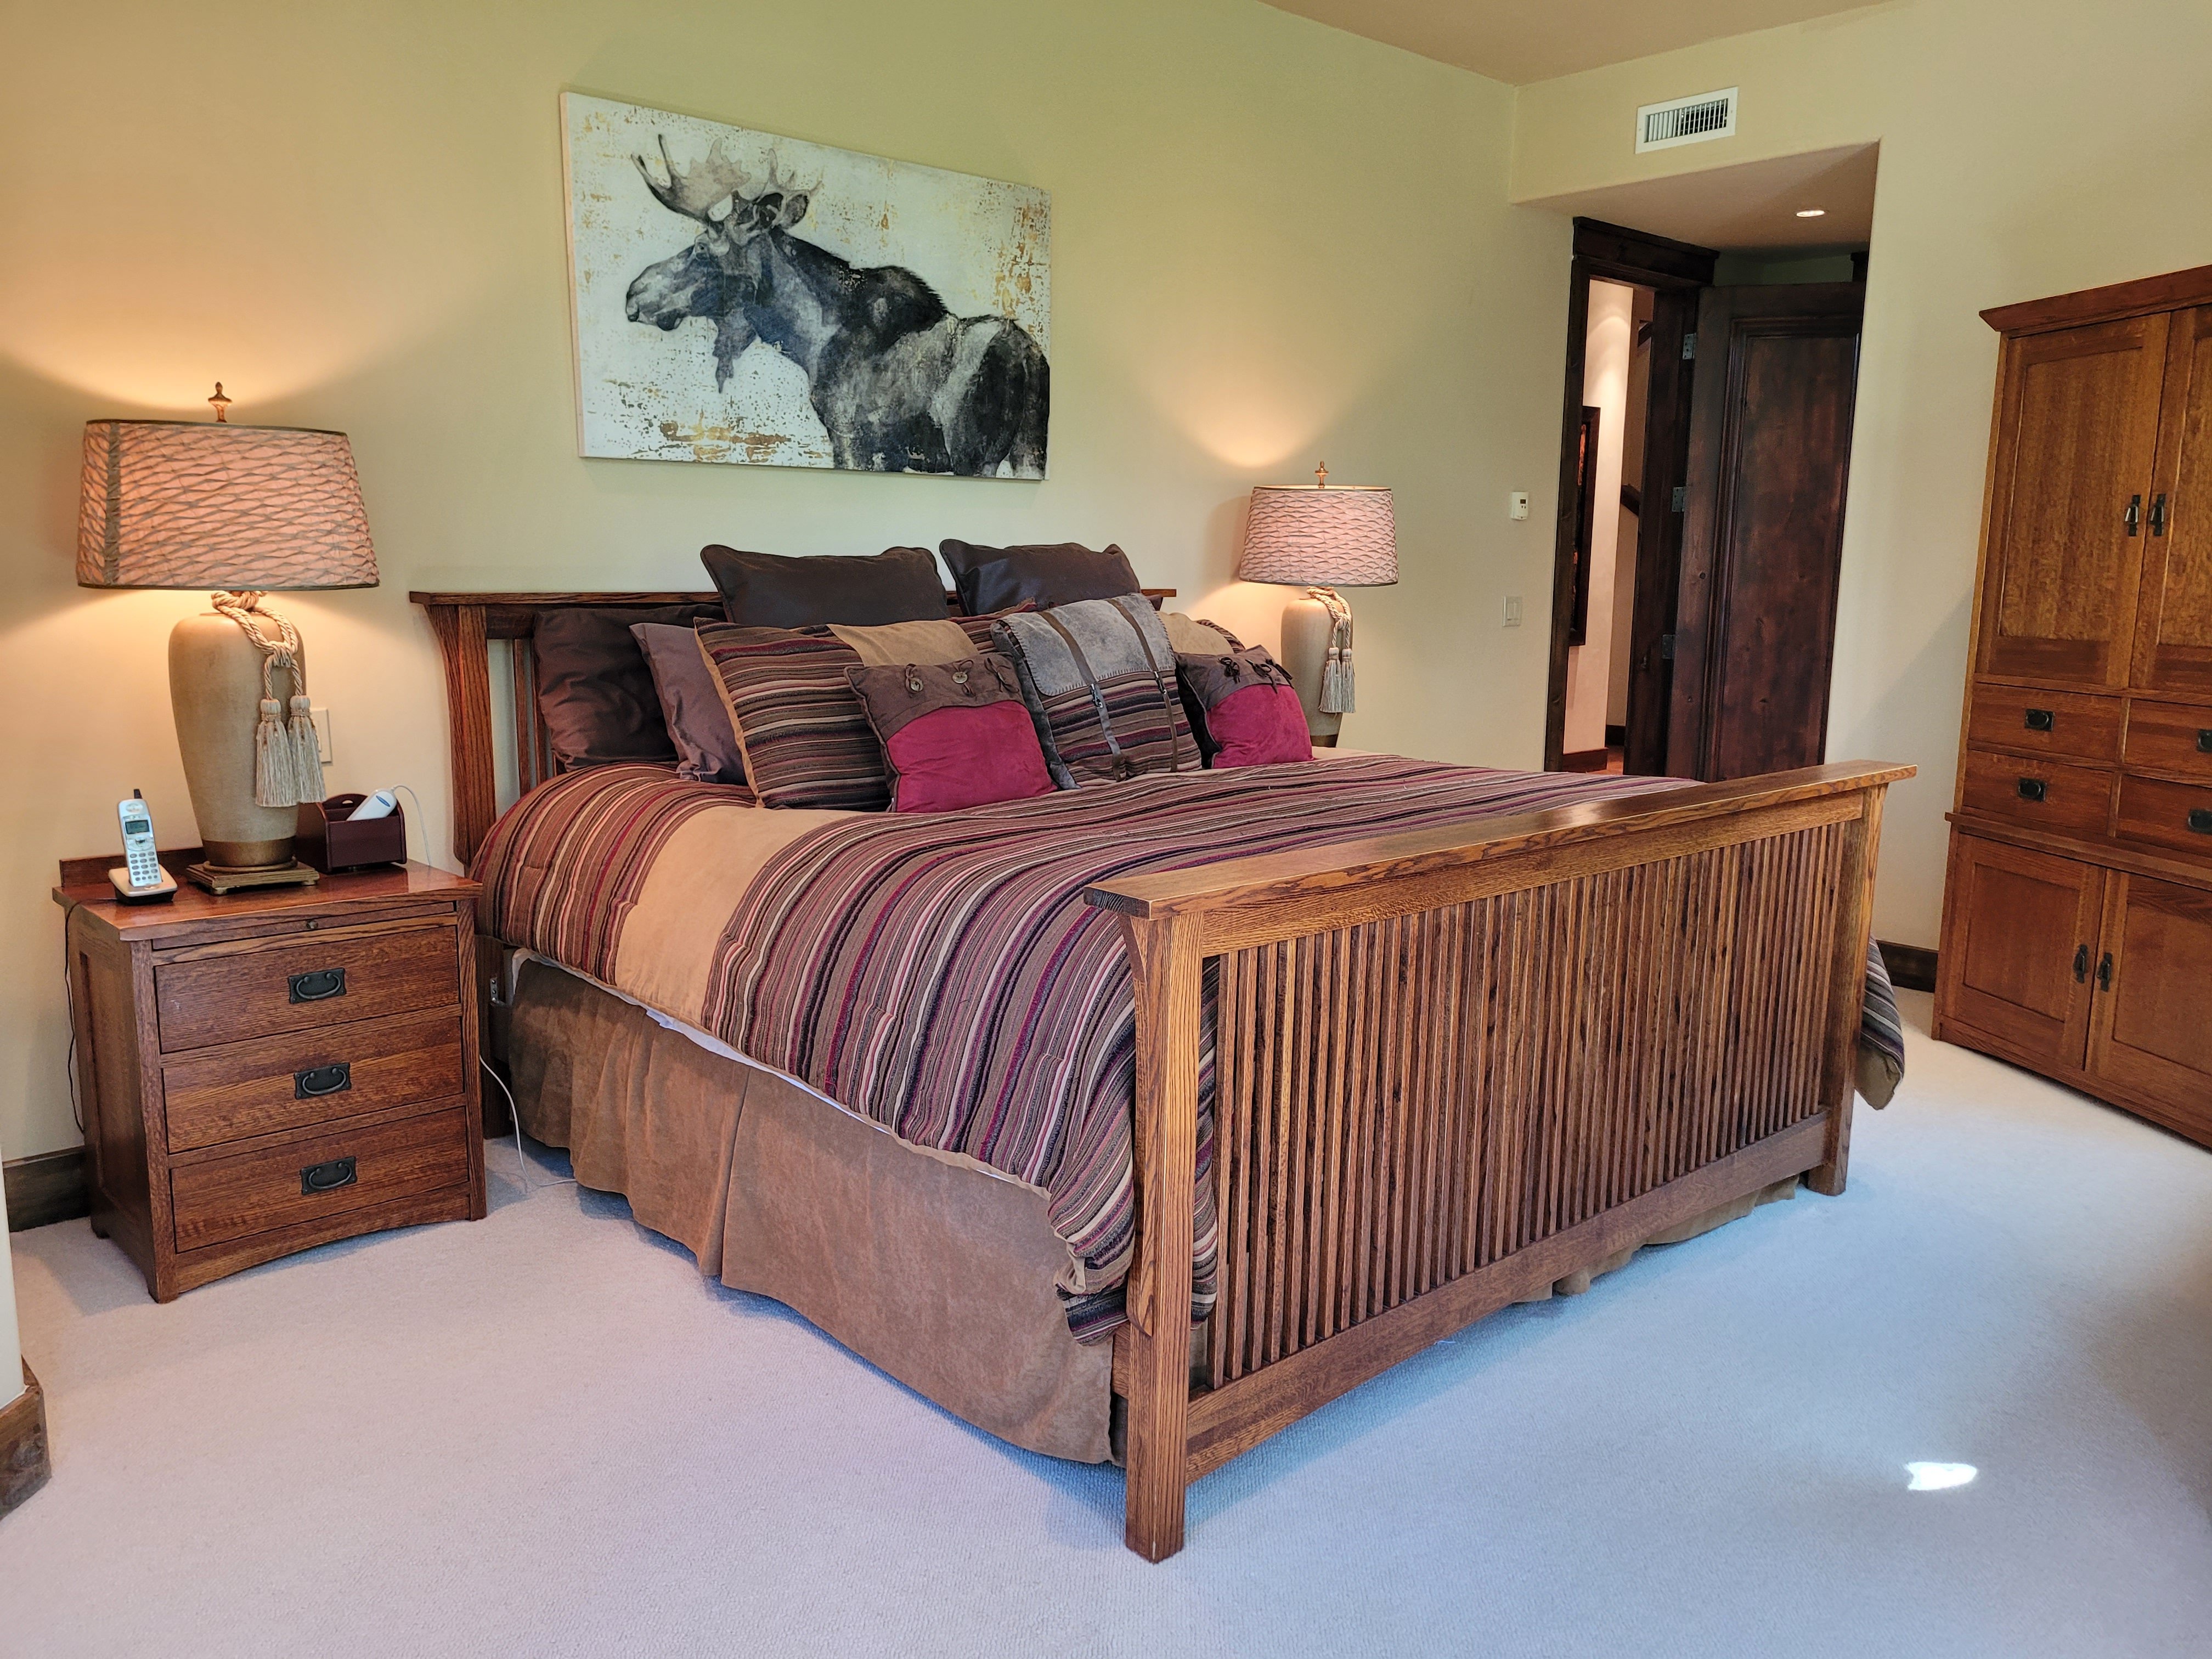 Large bed with wood frame and wood furniture